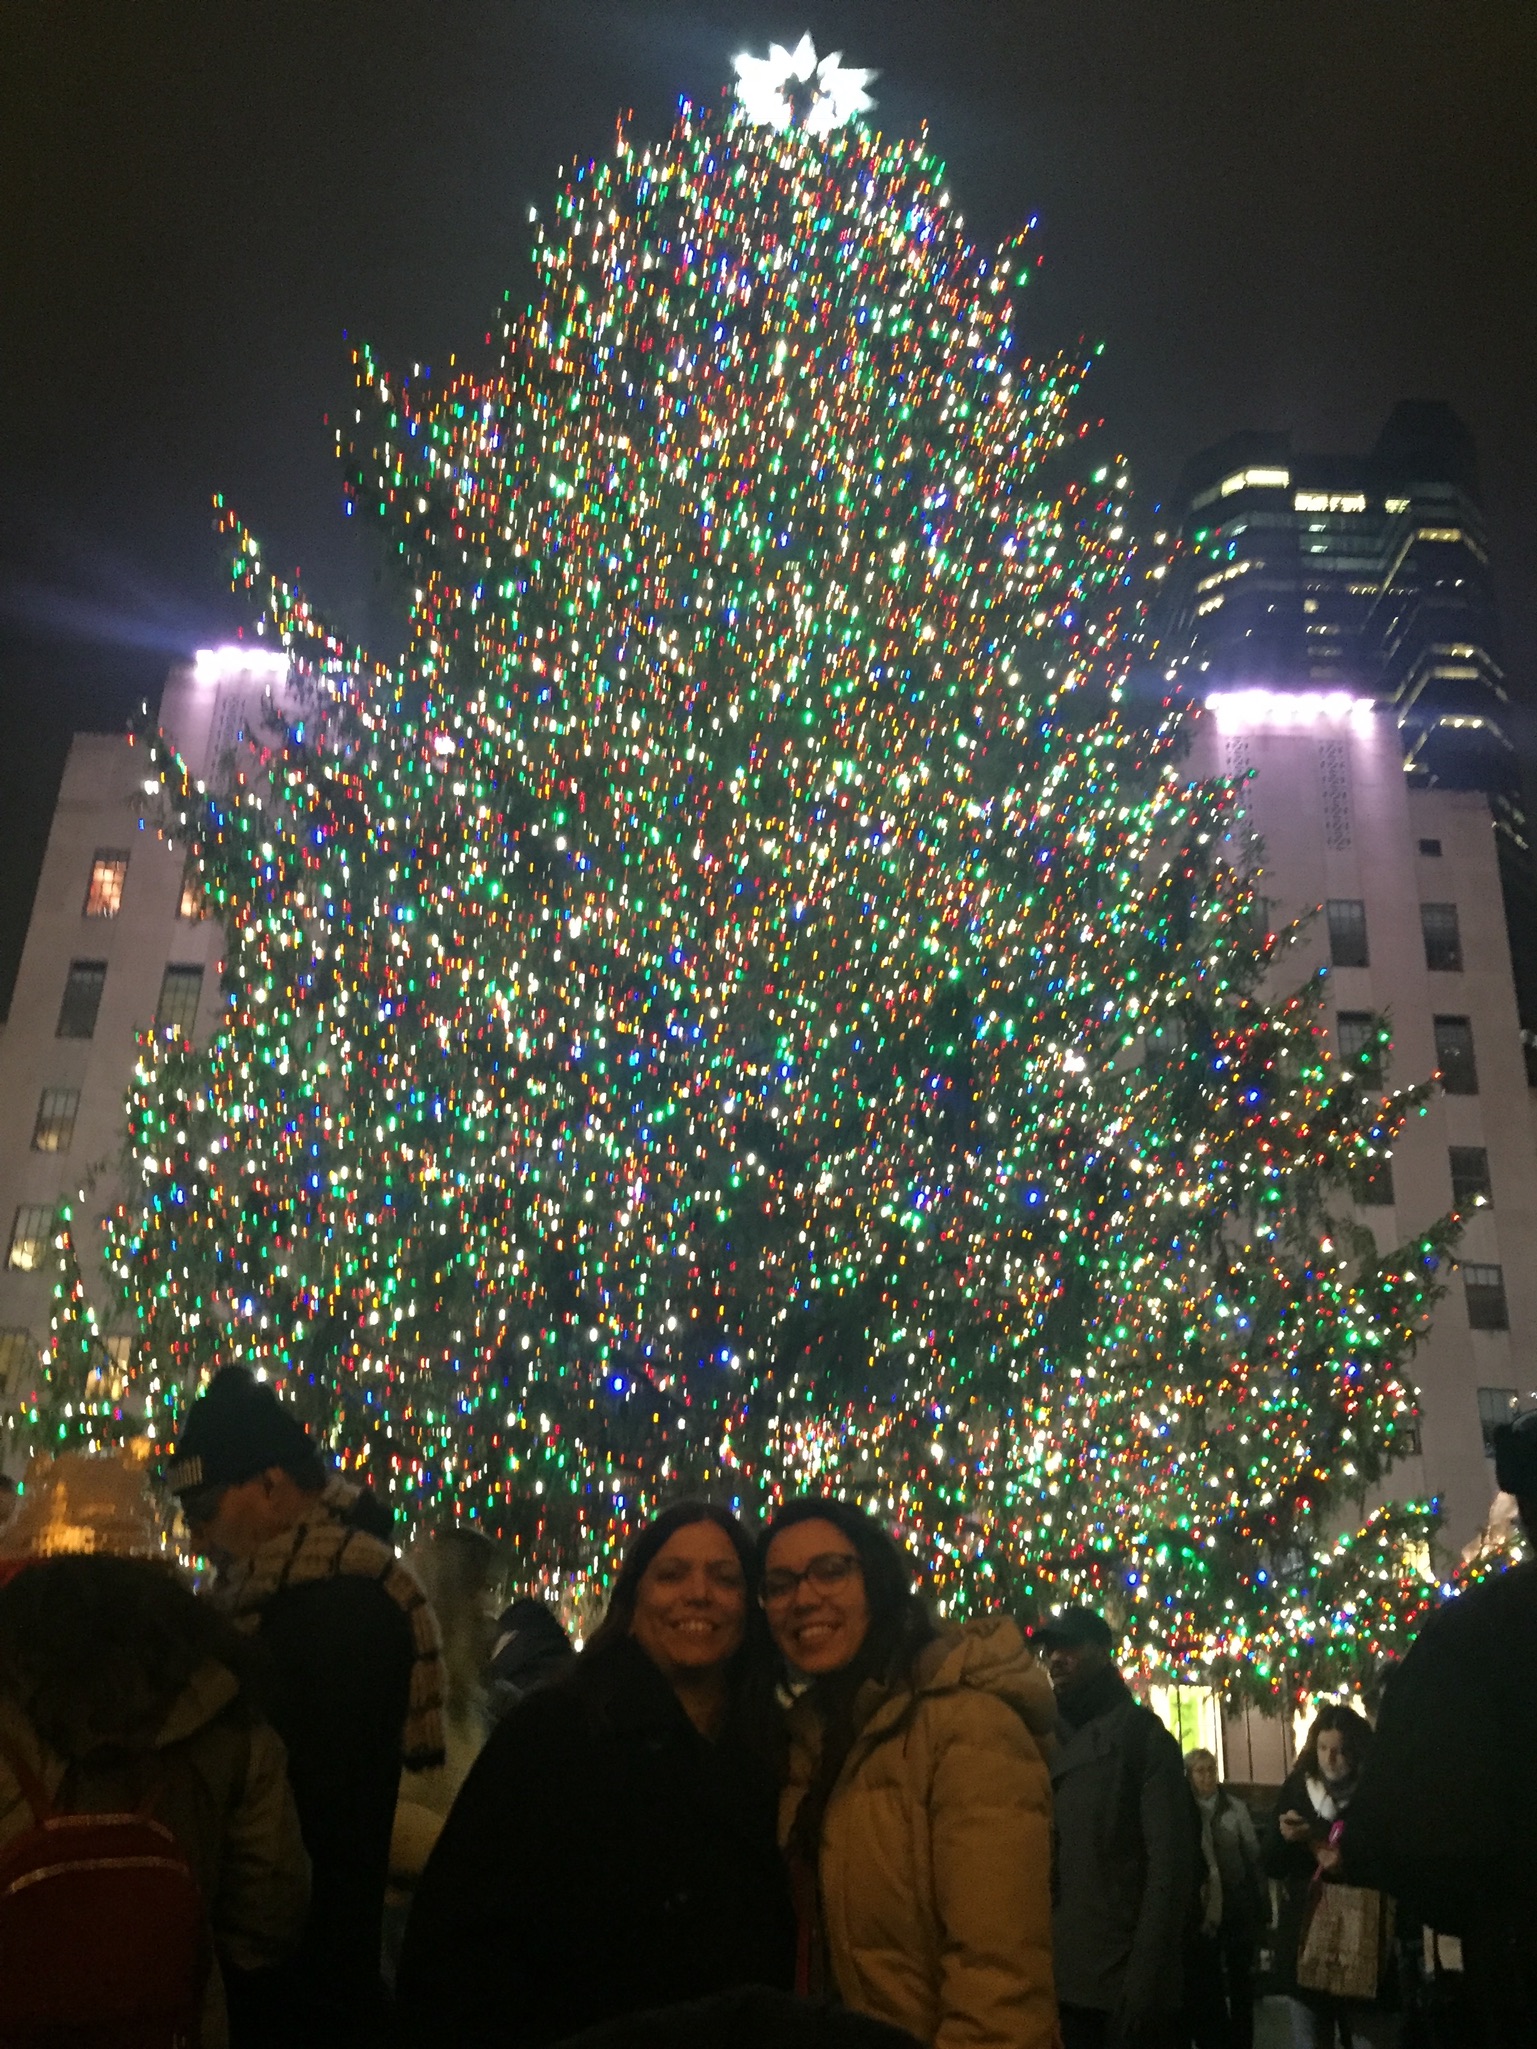  We walked through what felt like every person in NYC to get Chick-fil-a for dinner. It happens to be about &nbsp;midway between Bryant Park and Rockefeller Center, so we took our meal to go and sat in the lower concourse of 30 Rock to eat. We got a 